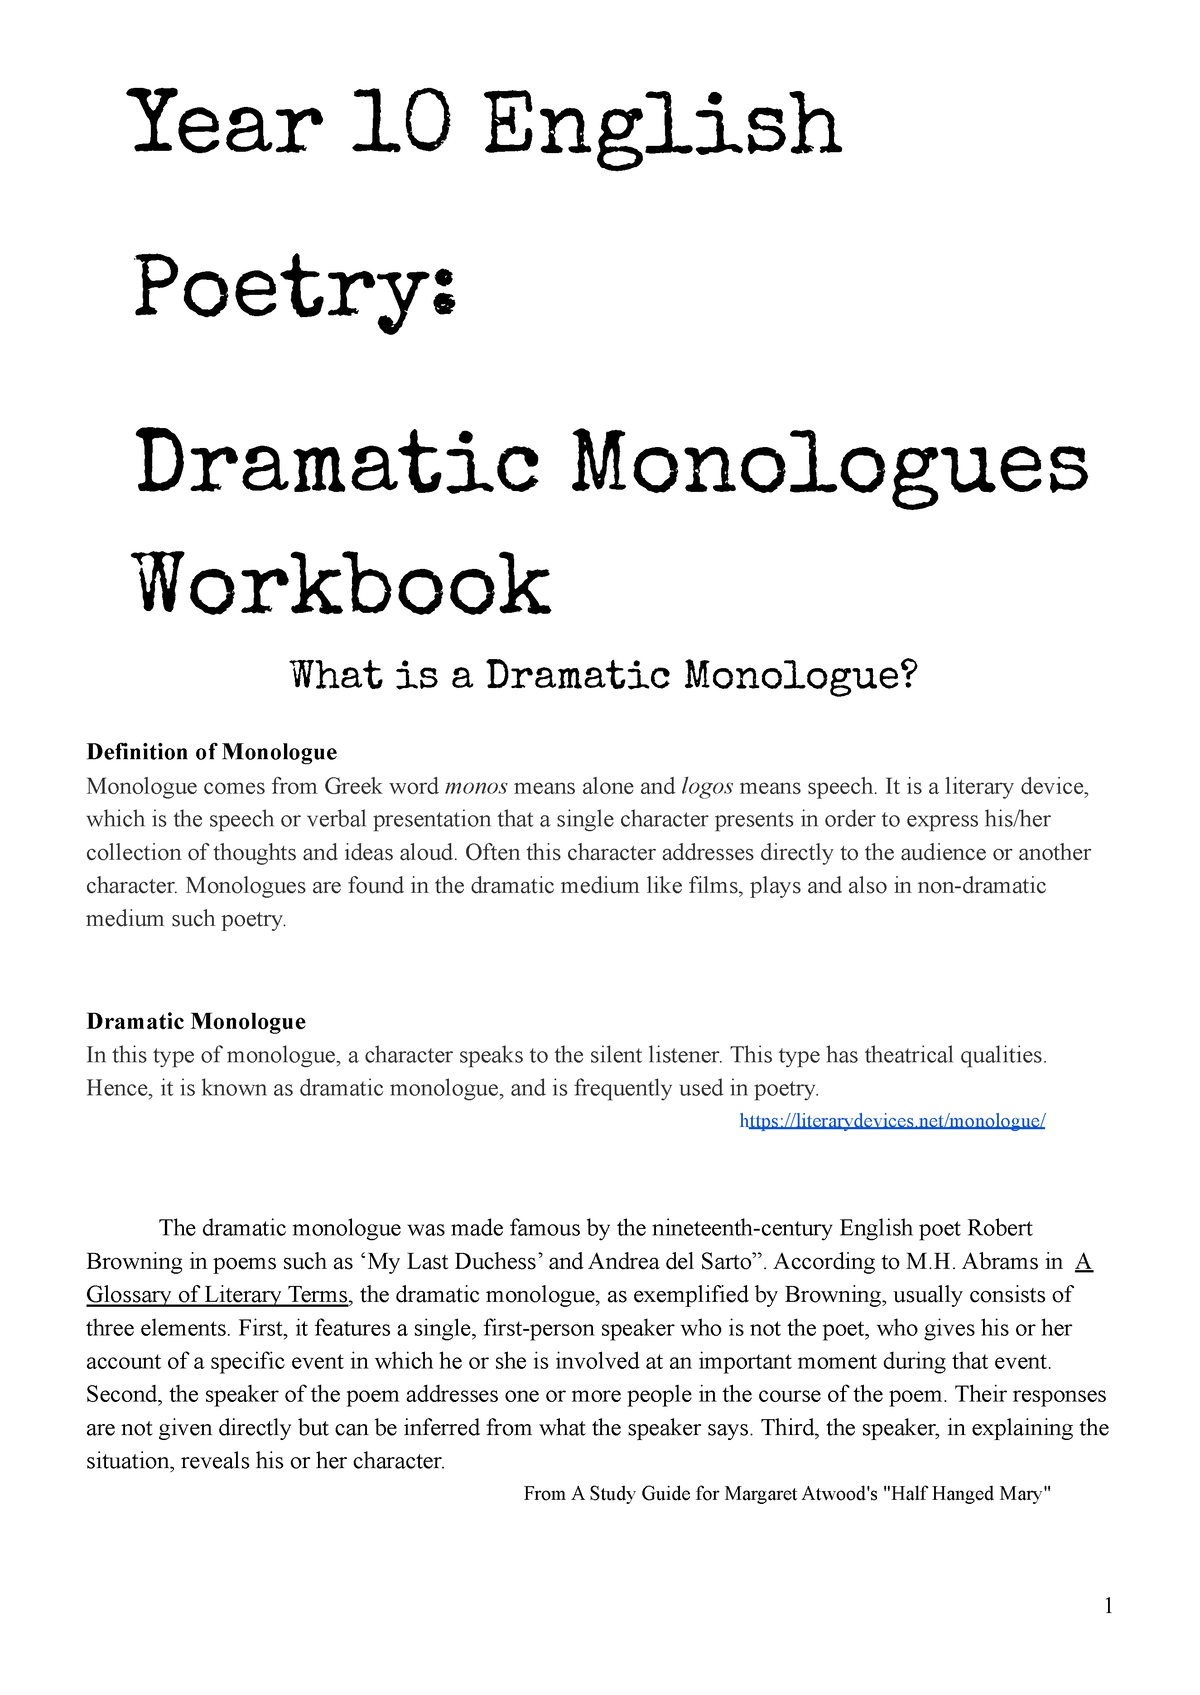 2021 Year 10 Dramatic Monologues Booklet Year 10 English Poetry 